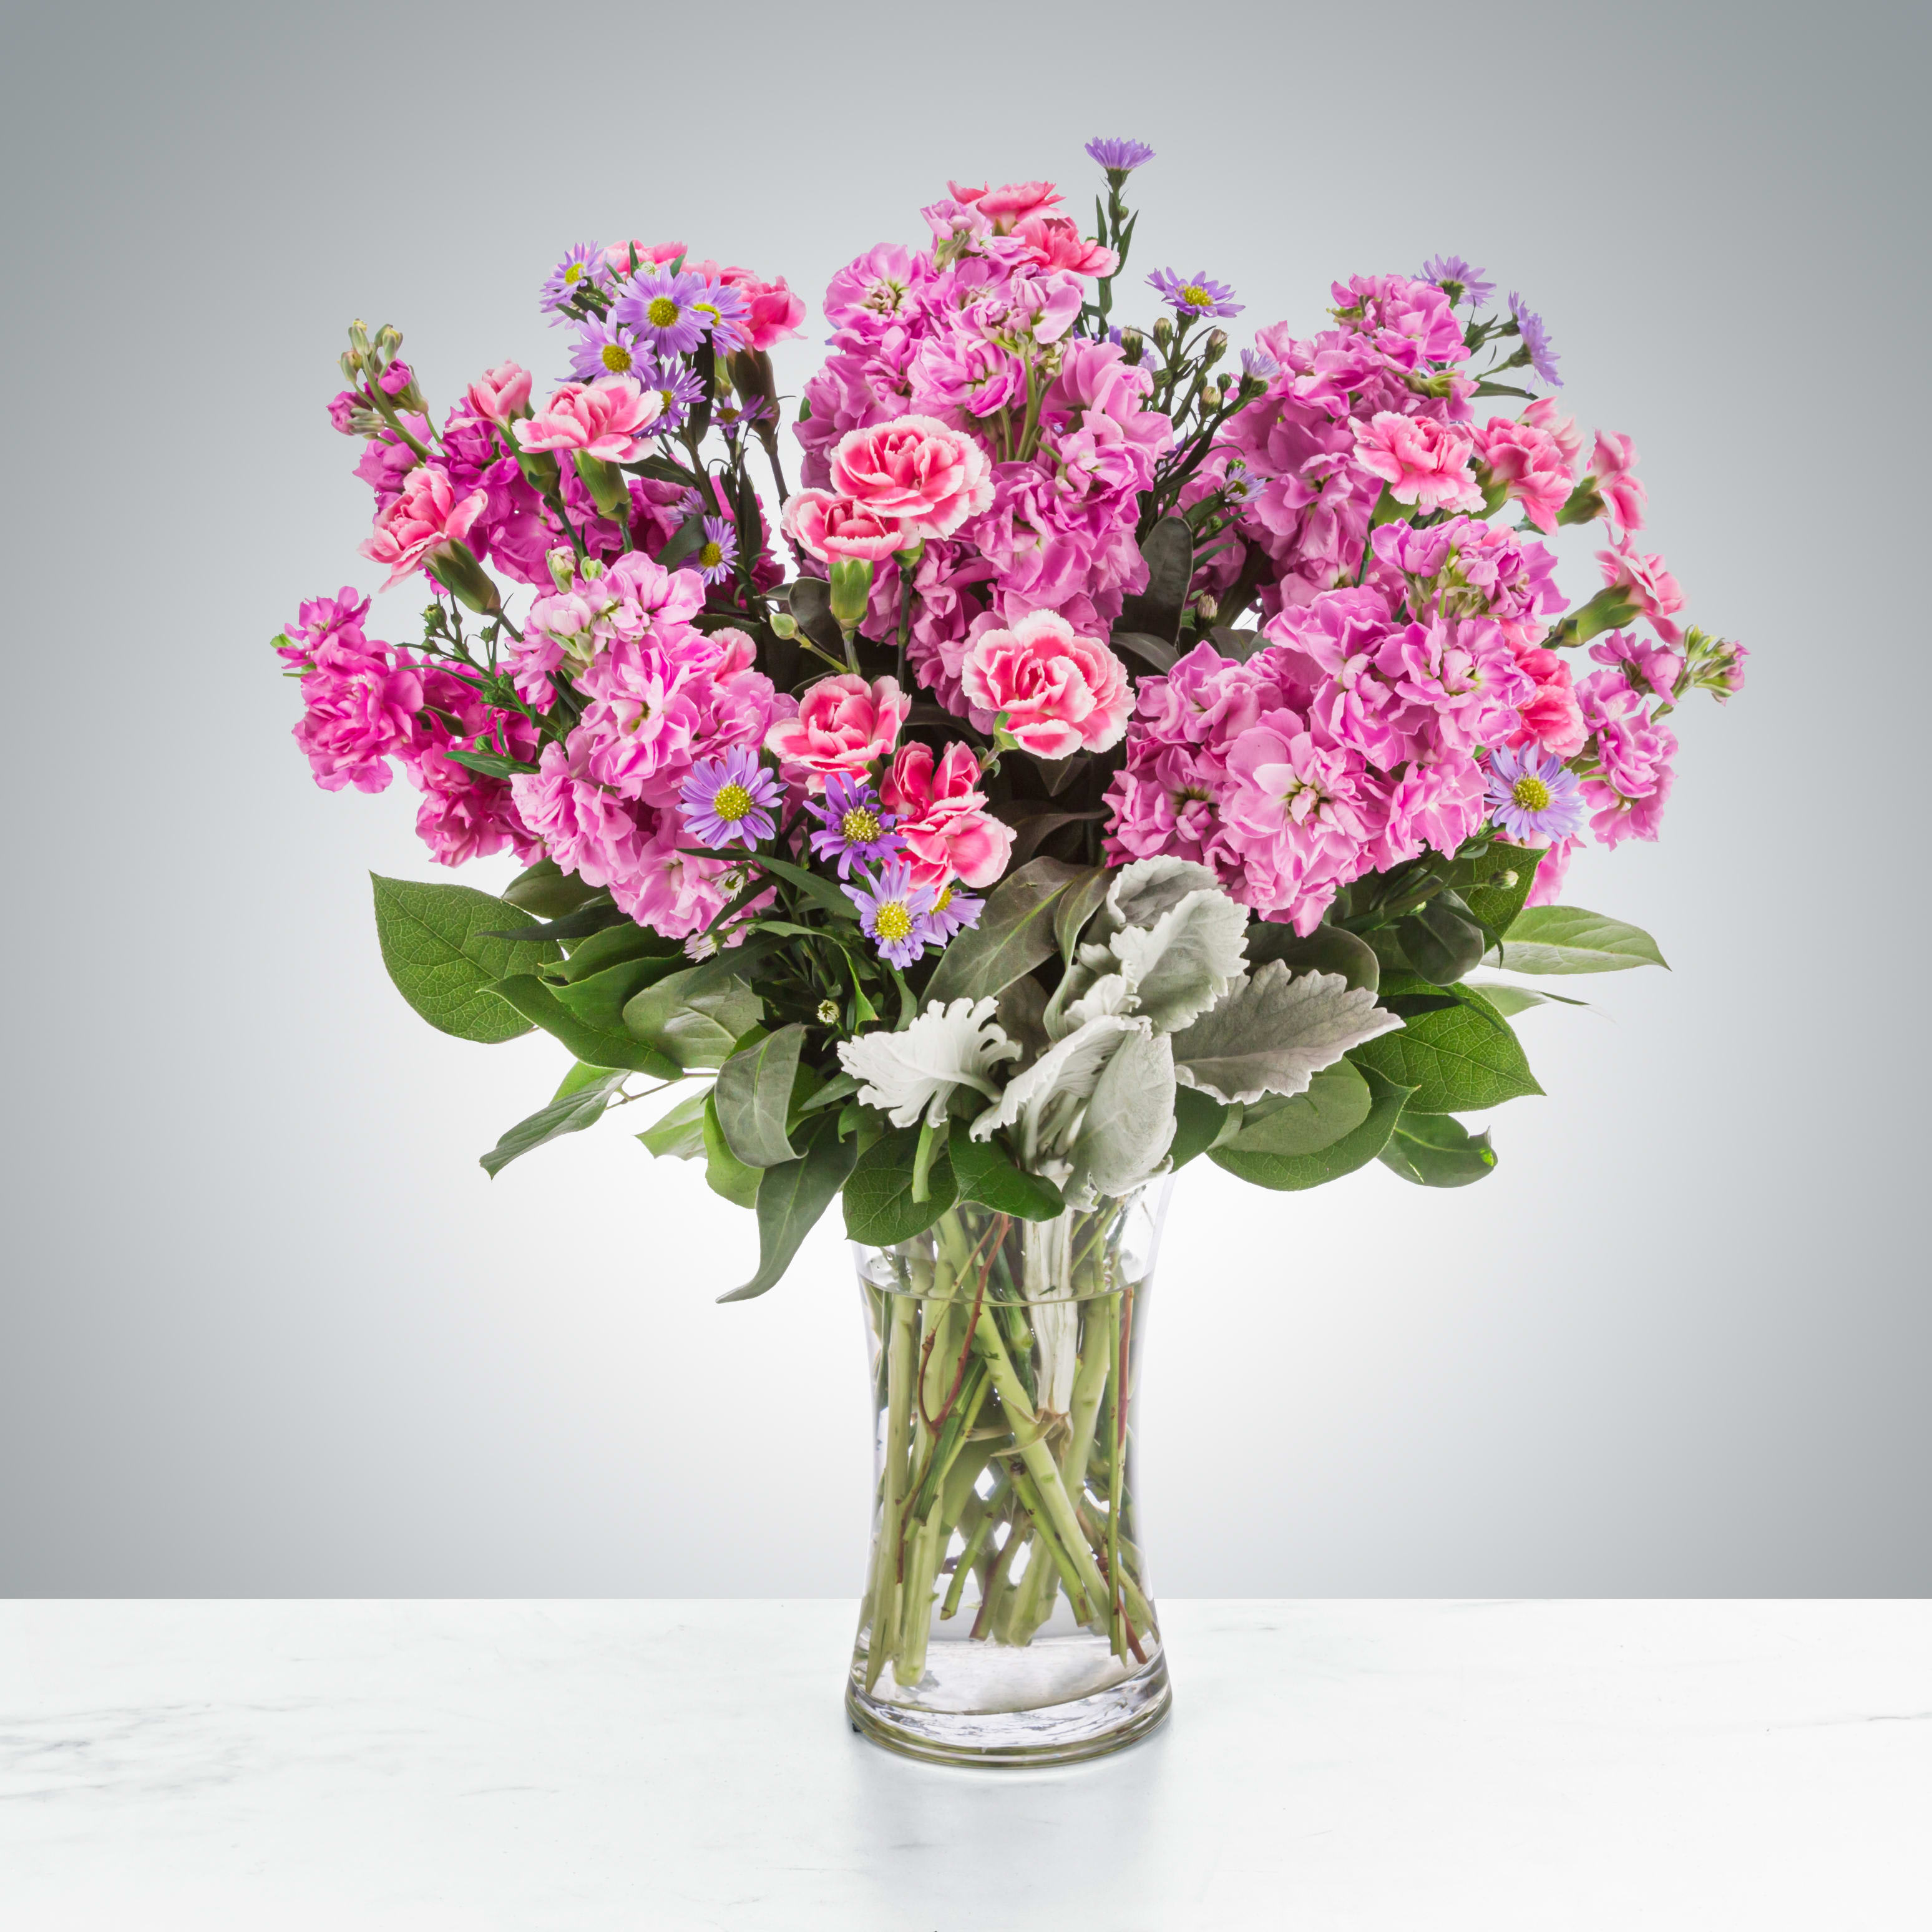 Uptown Girl by BloomNation™ - This arrangement is a pink and purple confection featuring sweet-smelling stock flowers and purple asters. A great gift for birthdays, women's day, or breast cancer awareness month. Shades of Pink and Purple may Vary slightly from the photo depending on stock availability.  Approximate Dimensions: 12&quot;D x 17&quot;H